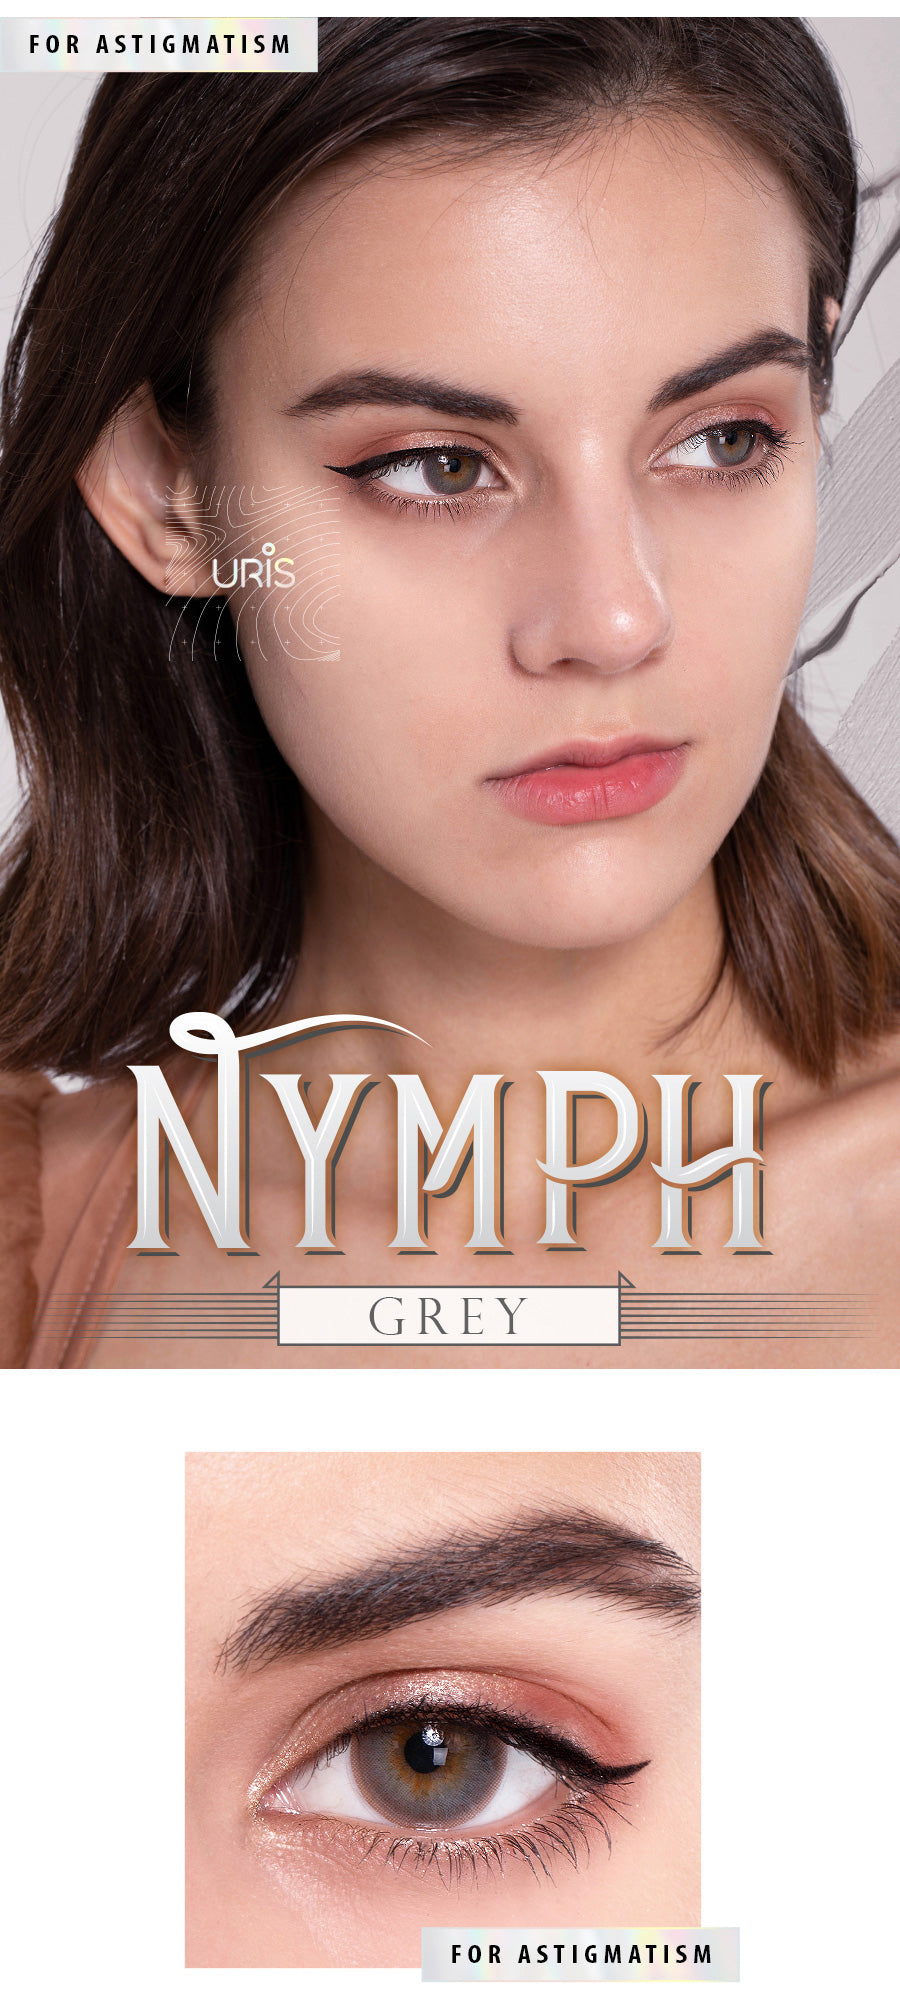 Uris Nymph Grey natural toric colored contact lenses for astigmatism